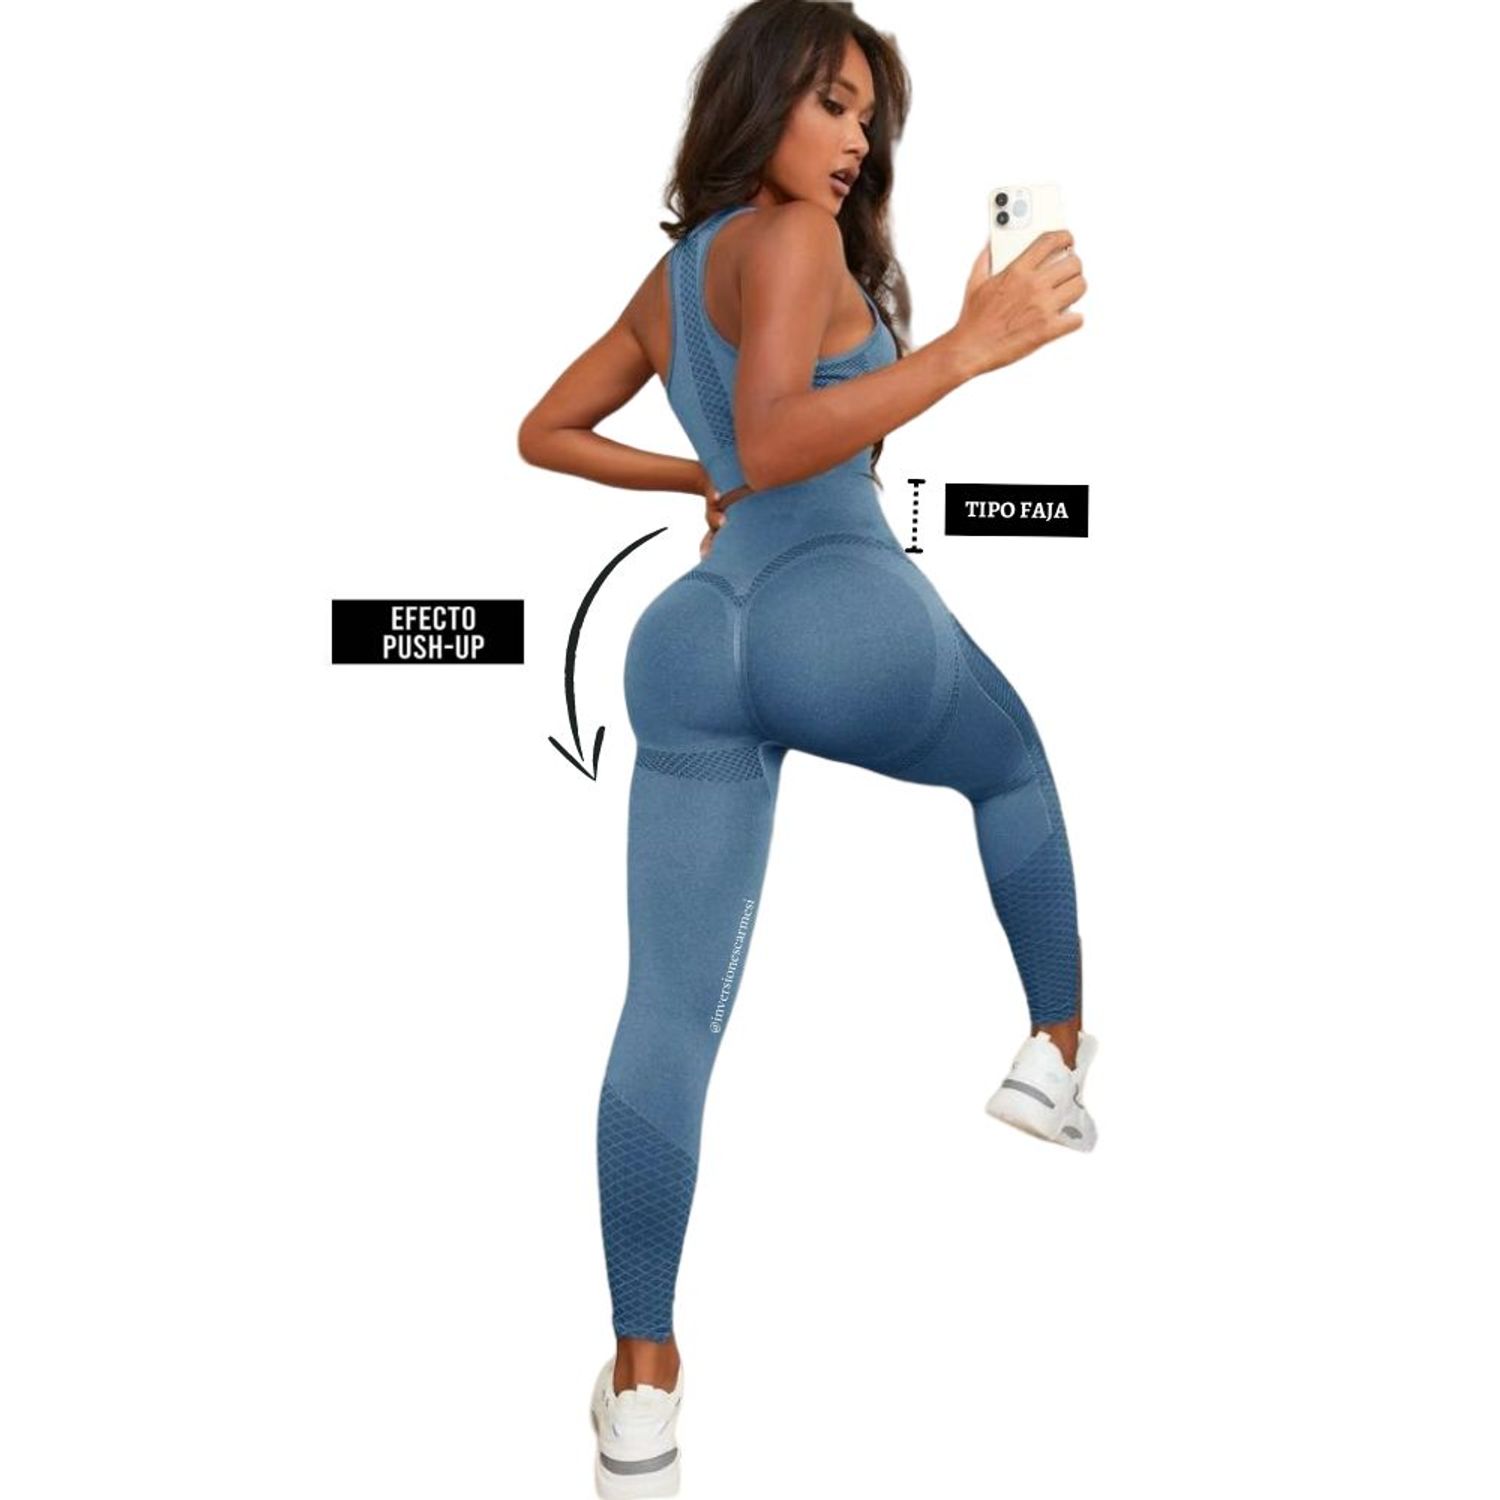 Leggins colombianos [Push Up deportivos] - TFIT